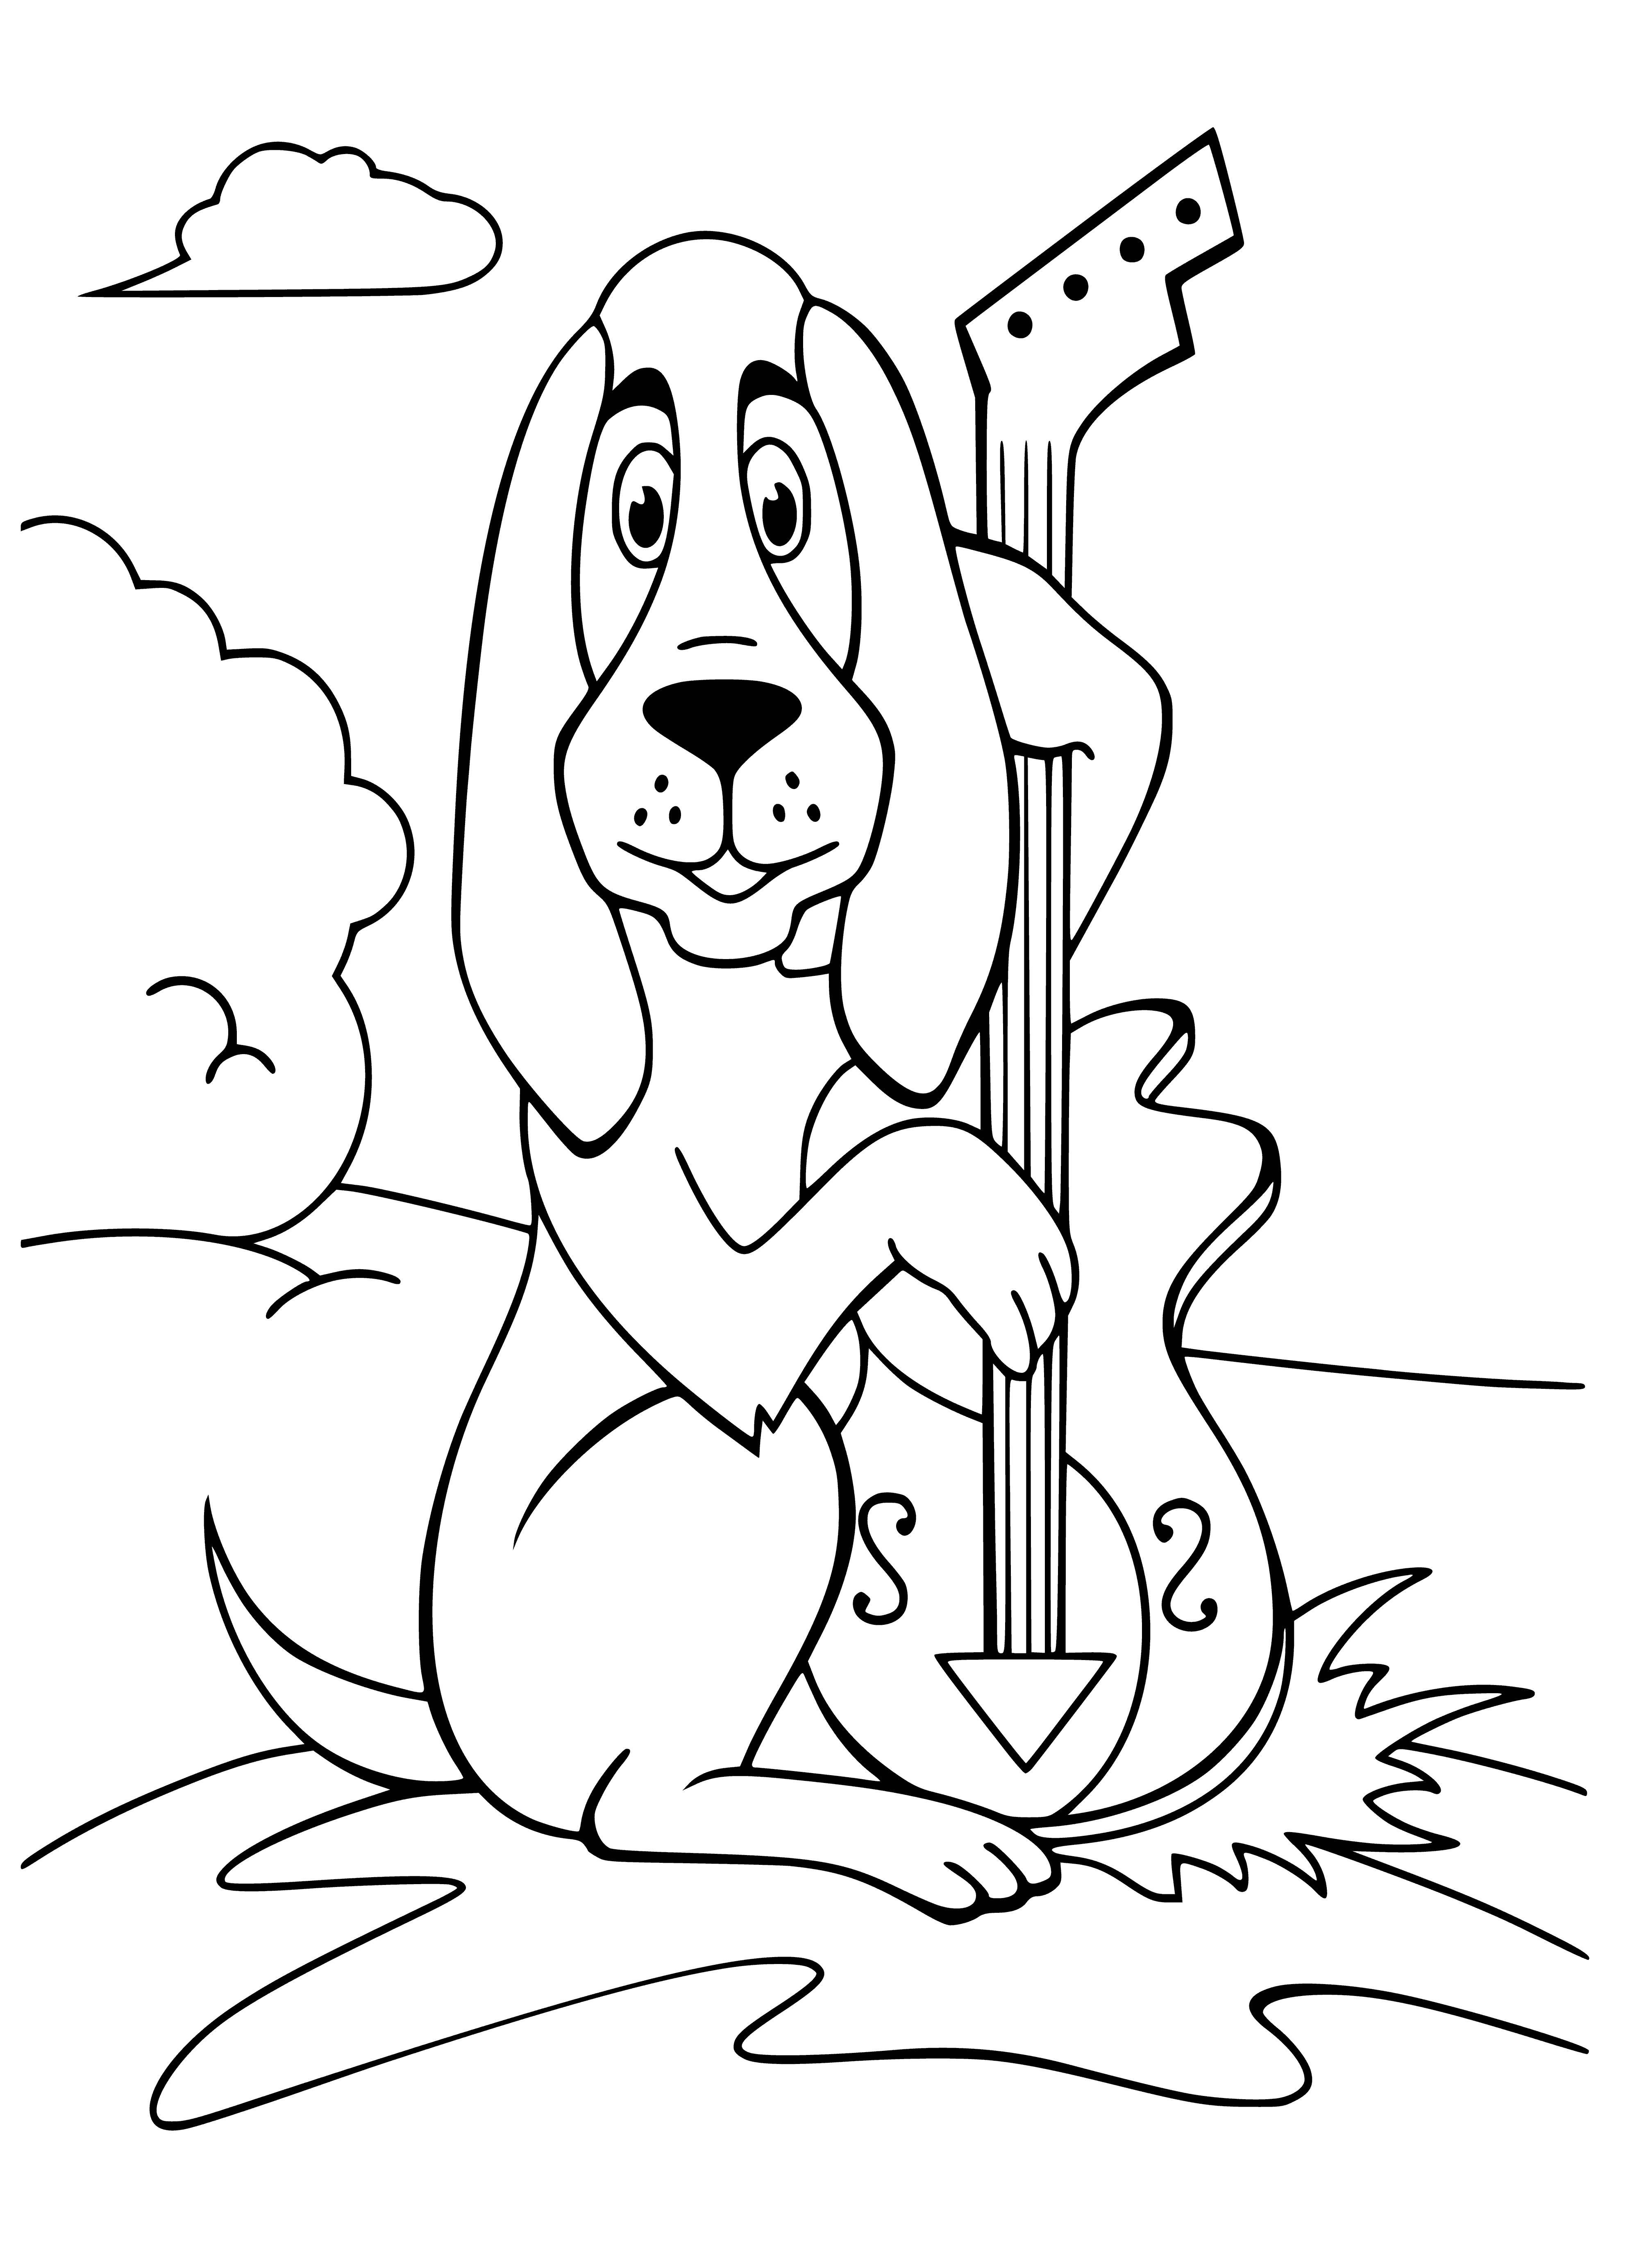 coloring page: Coloring page of a dog made of bricks, facing away with a black nose. #coloring #animals